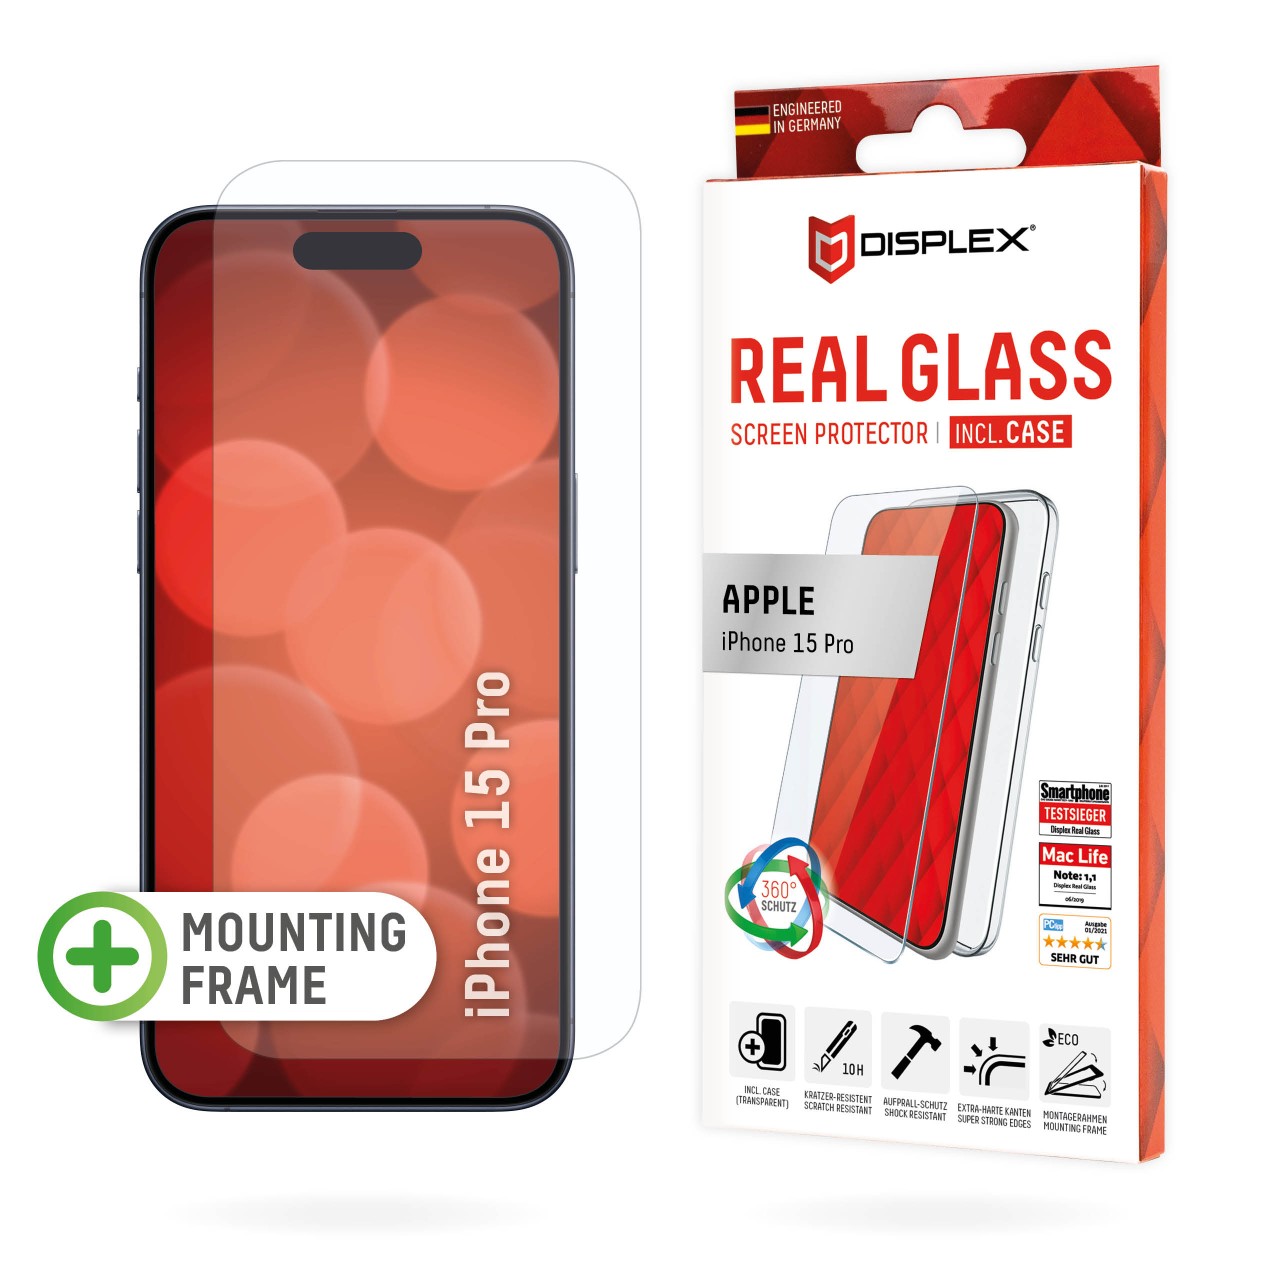 Real Glass for Apple iPhone XS Max/11 Pro Max (6,5"), Full Cover